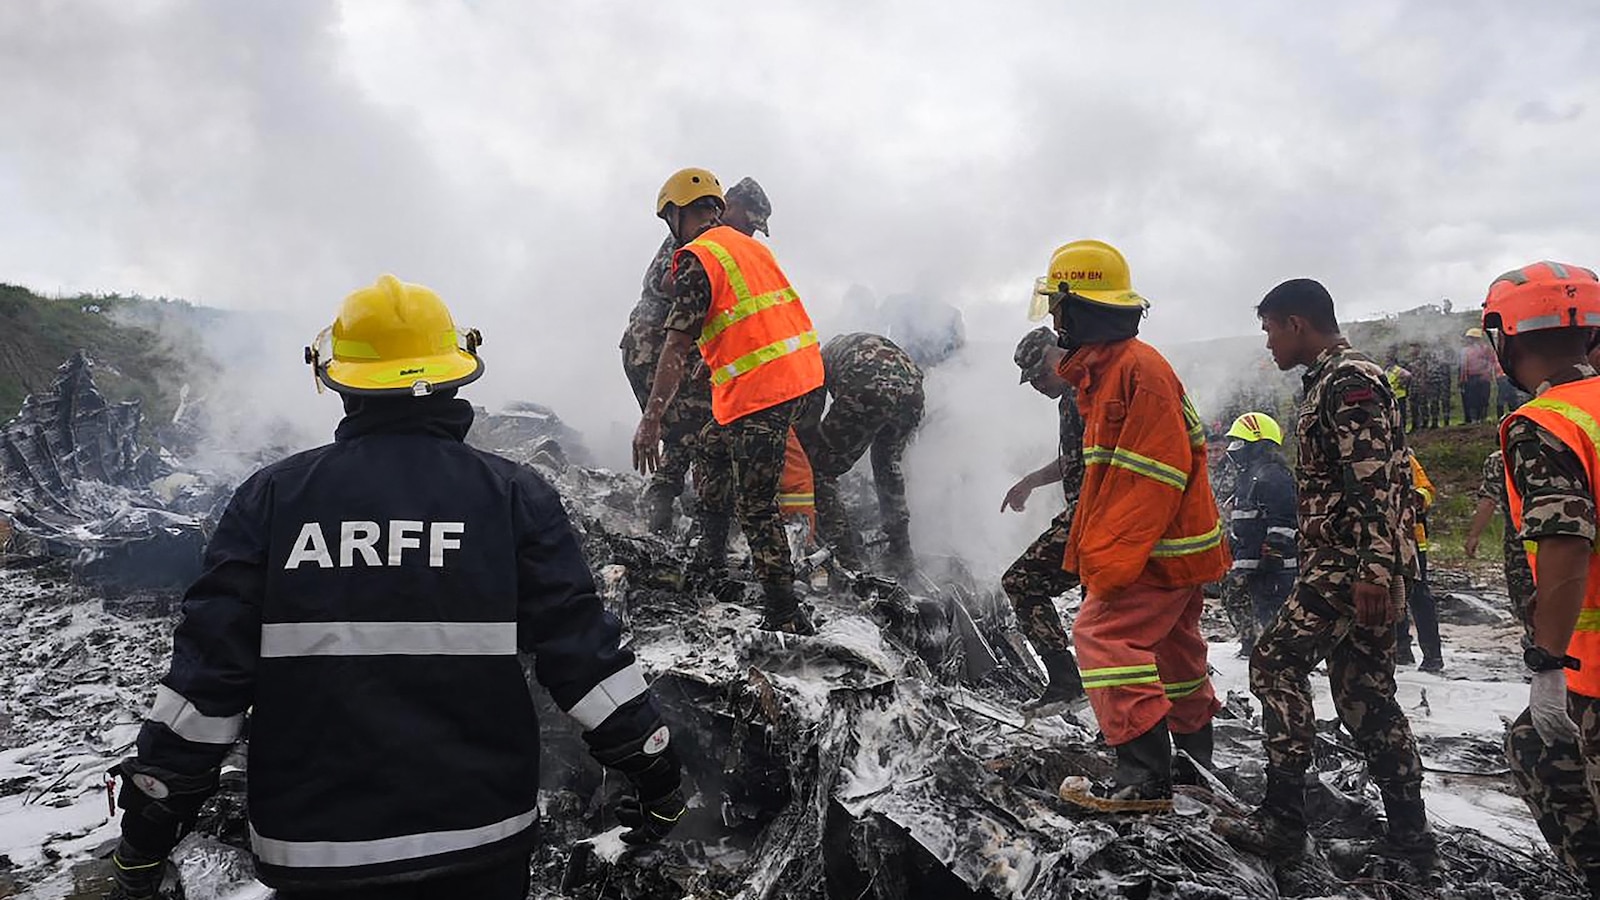 Passenger plane crashes during takeoff in Nepal, killing 18, aviation officials say